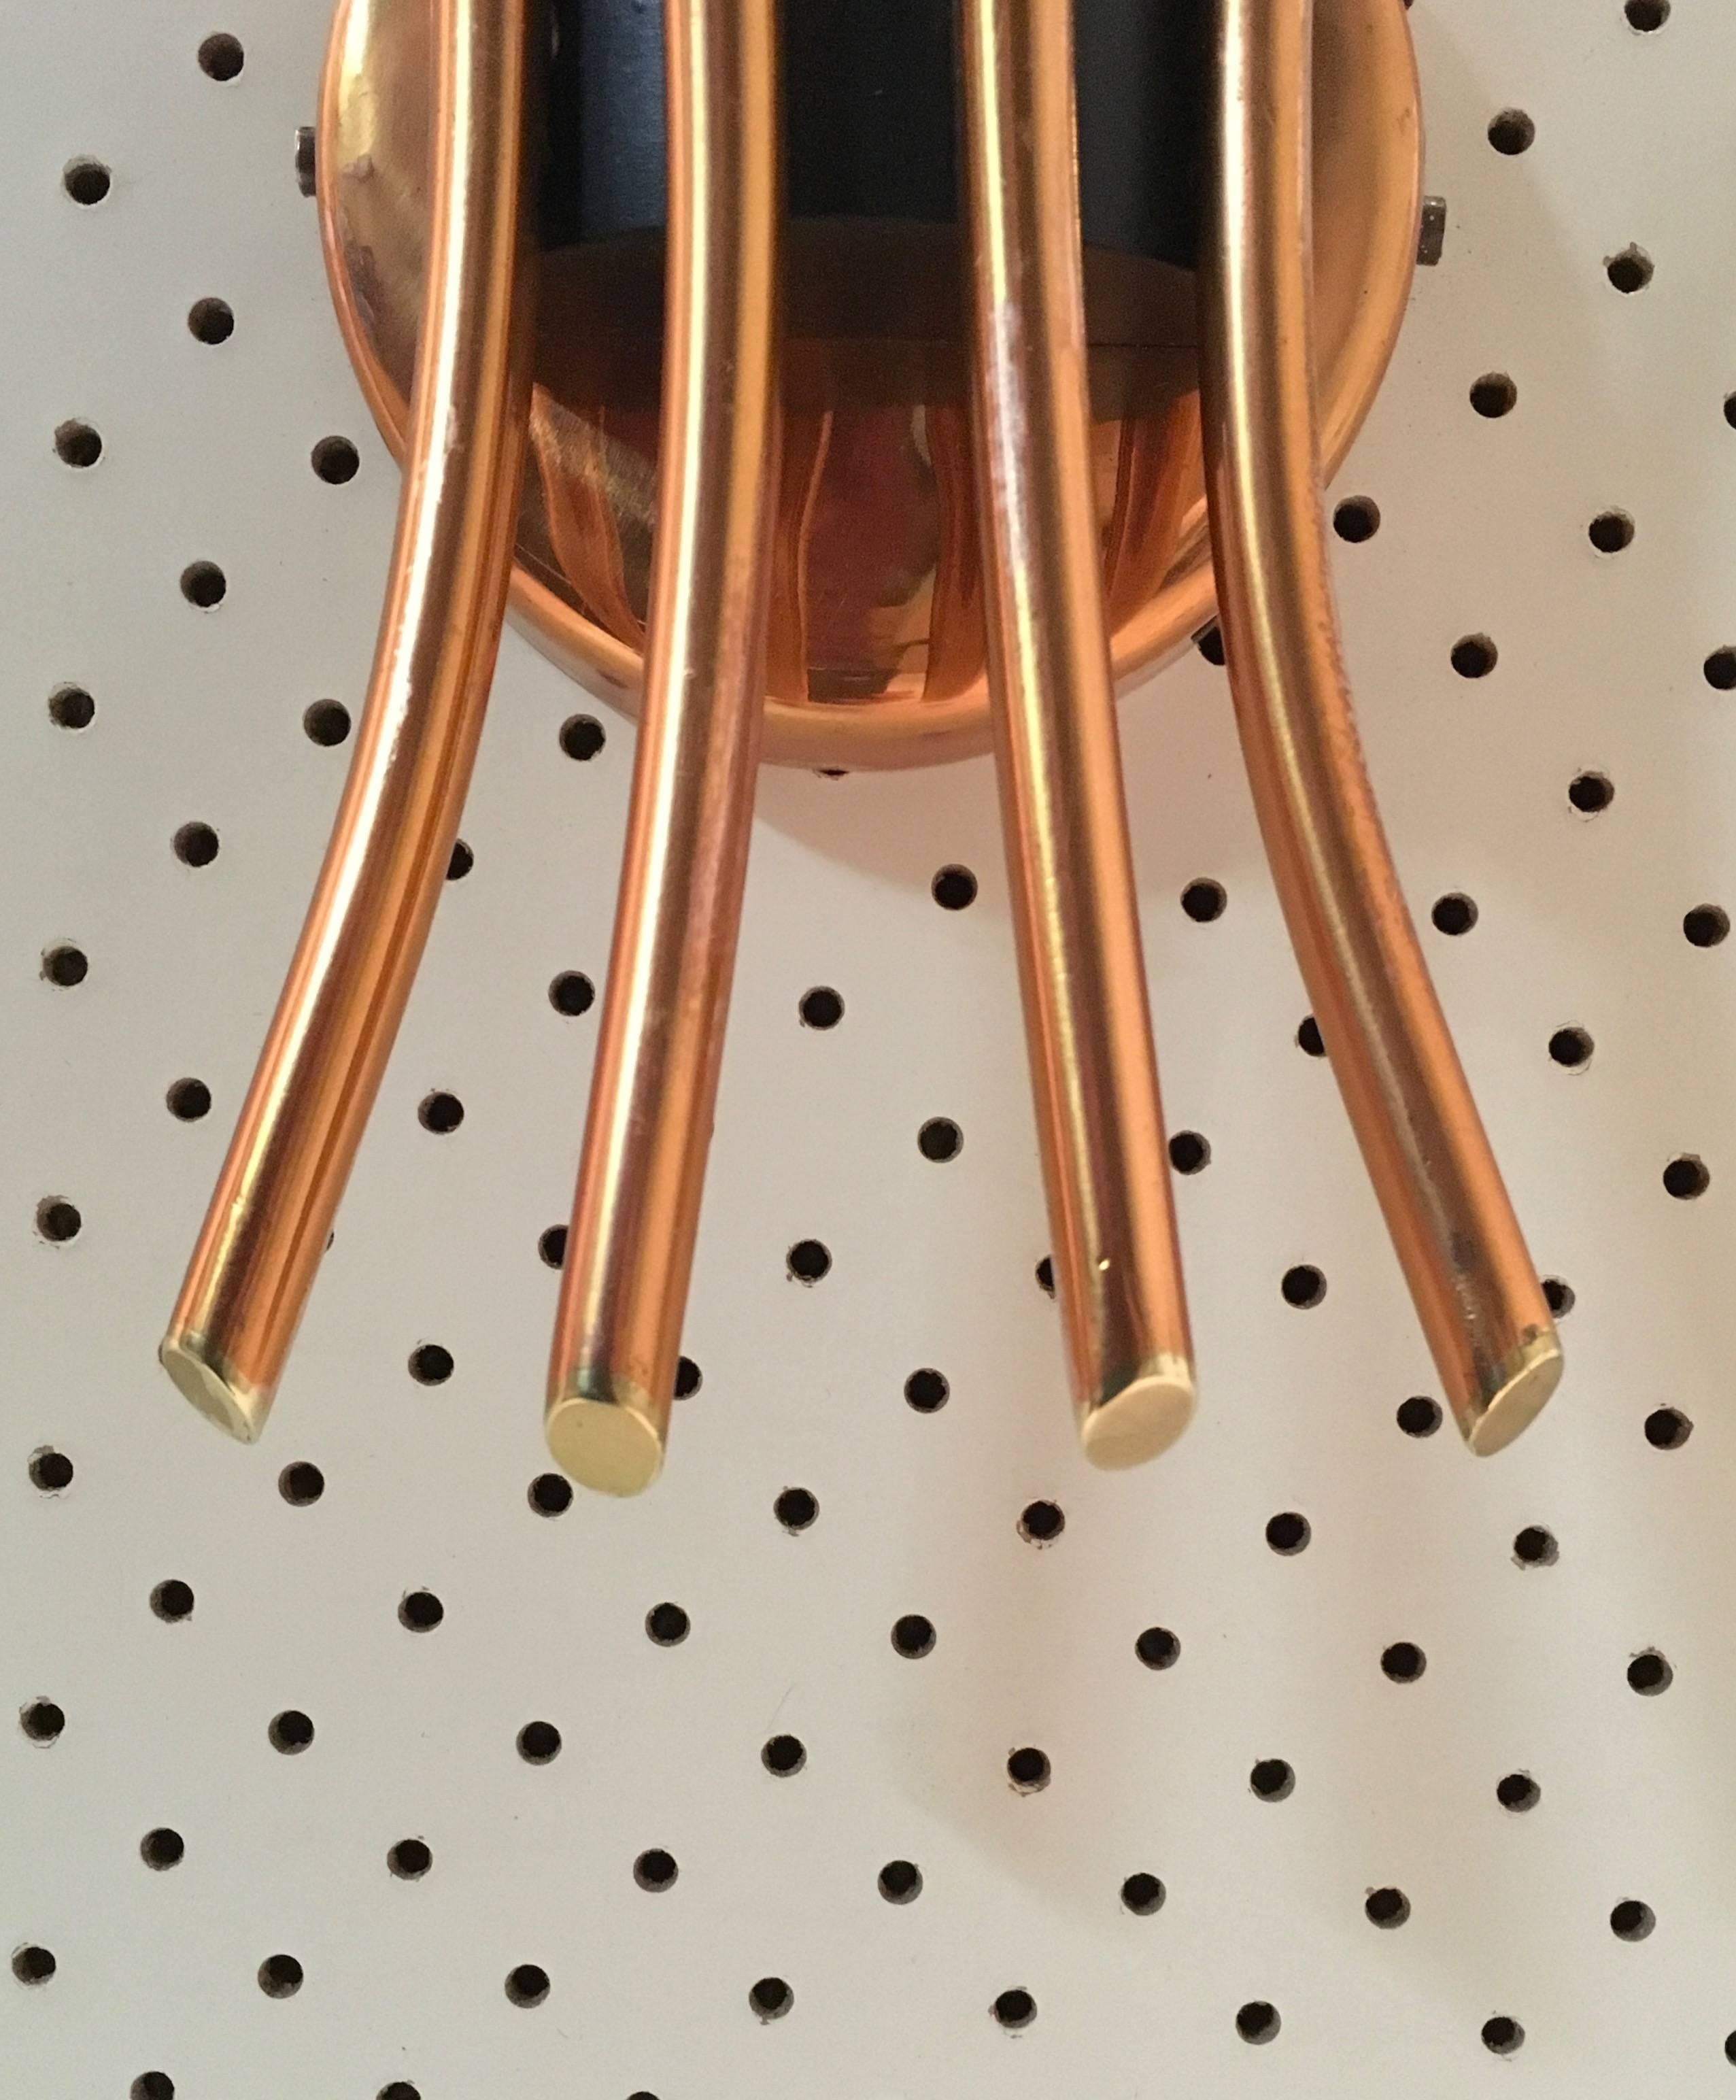 Brown Evans and Co. 'BECO' Copper Wall Sconces for Anatol Kagan, Melbourne 1950s 1